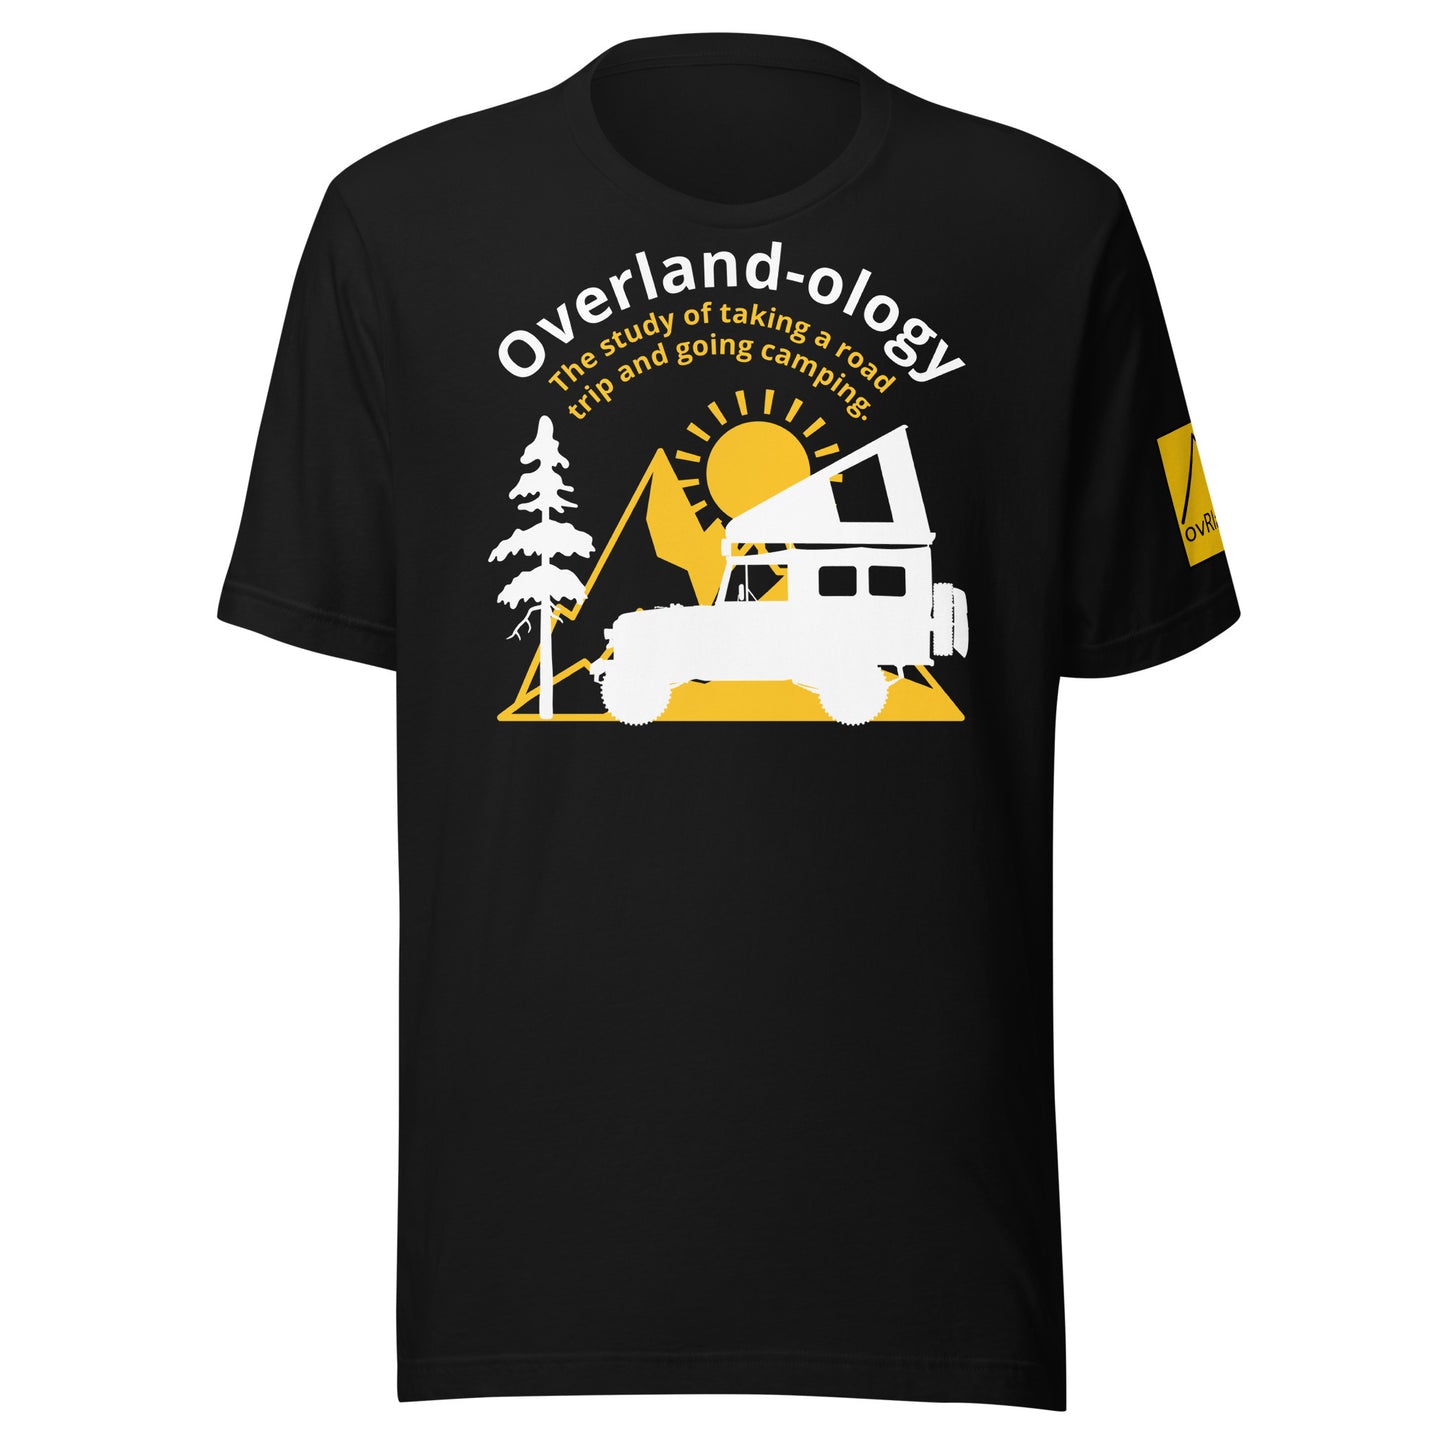 Overland-ology - The study of taking a road trip and going camping. Black t-shirt. overland365.com